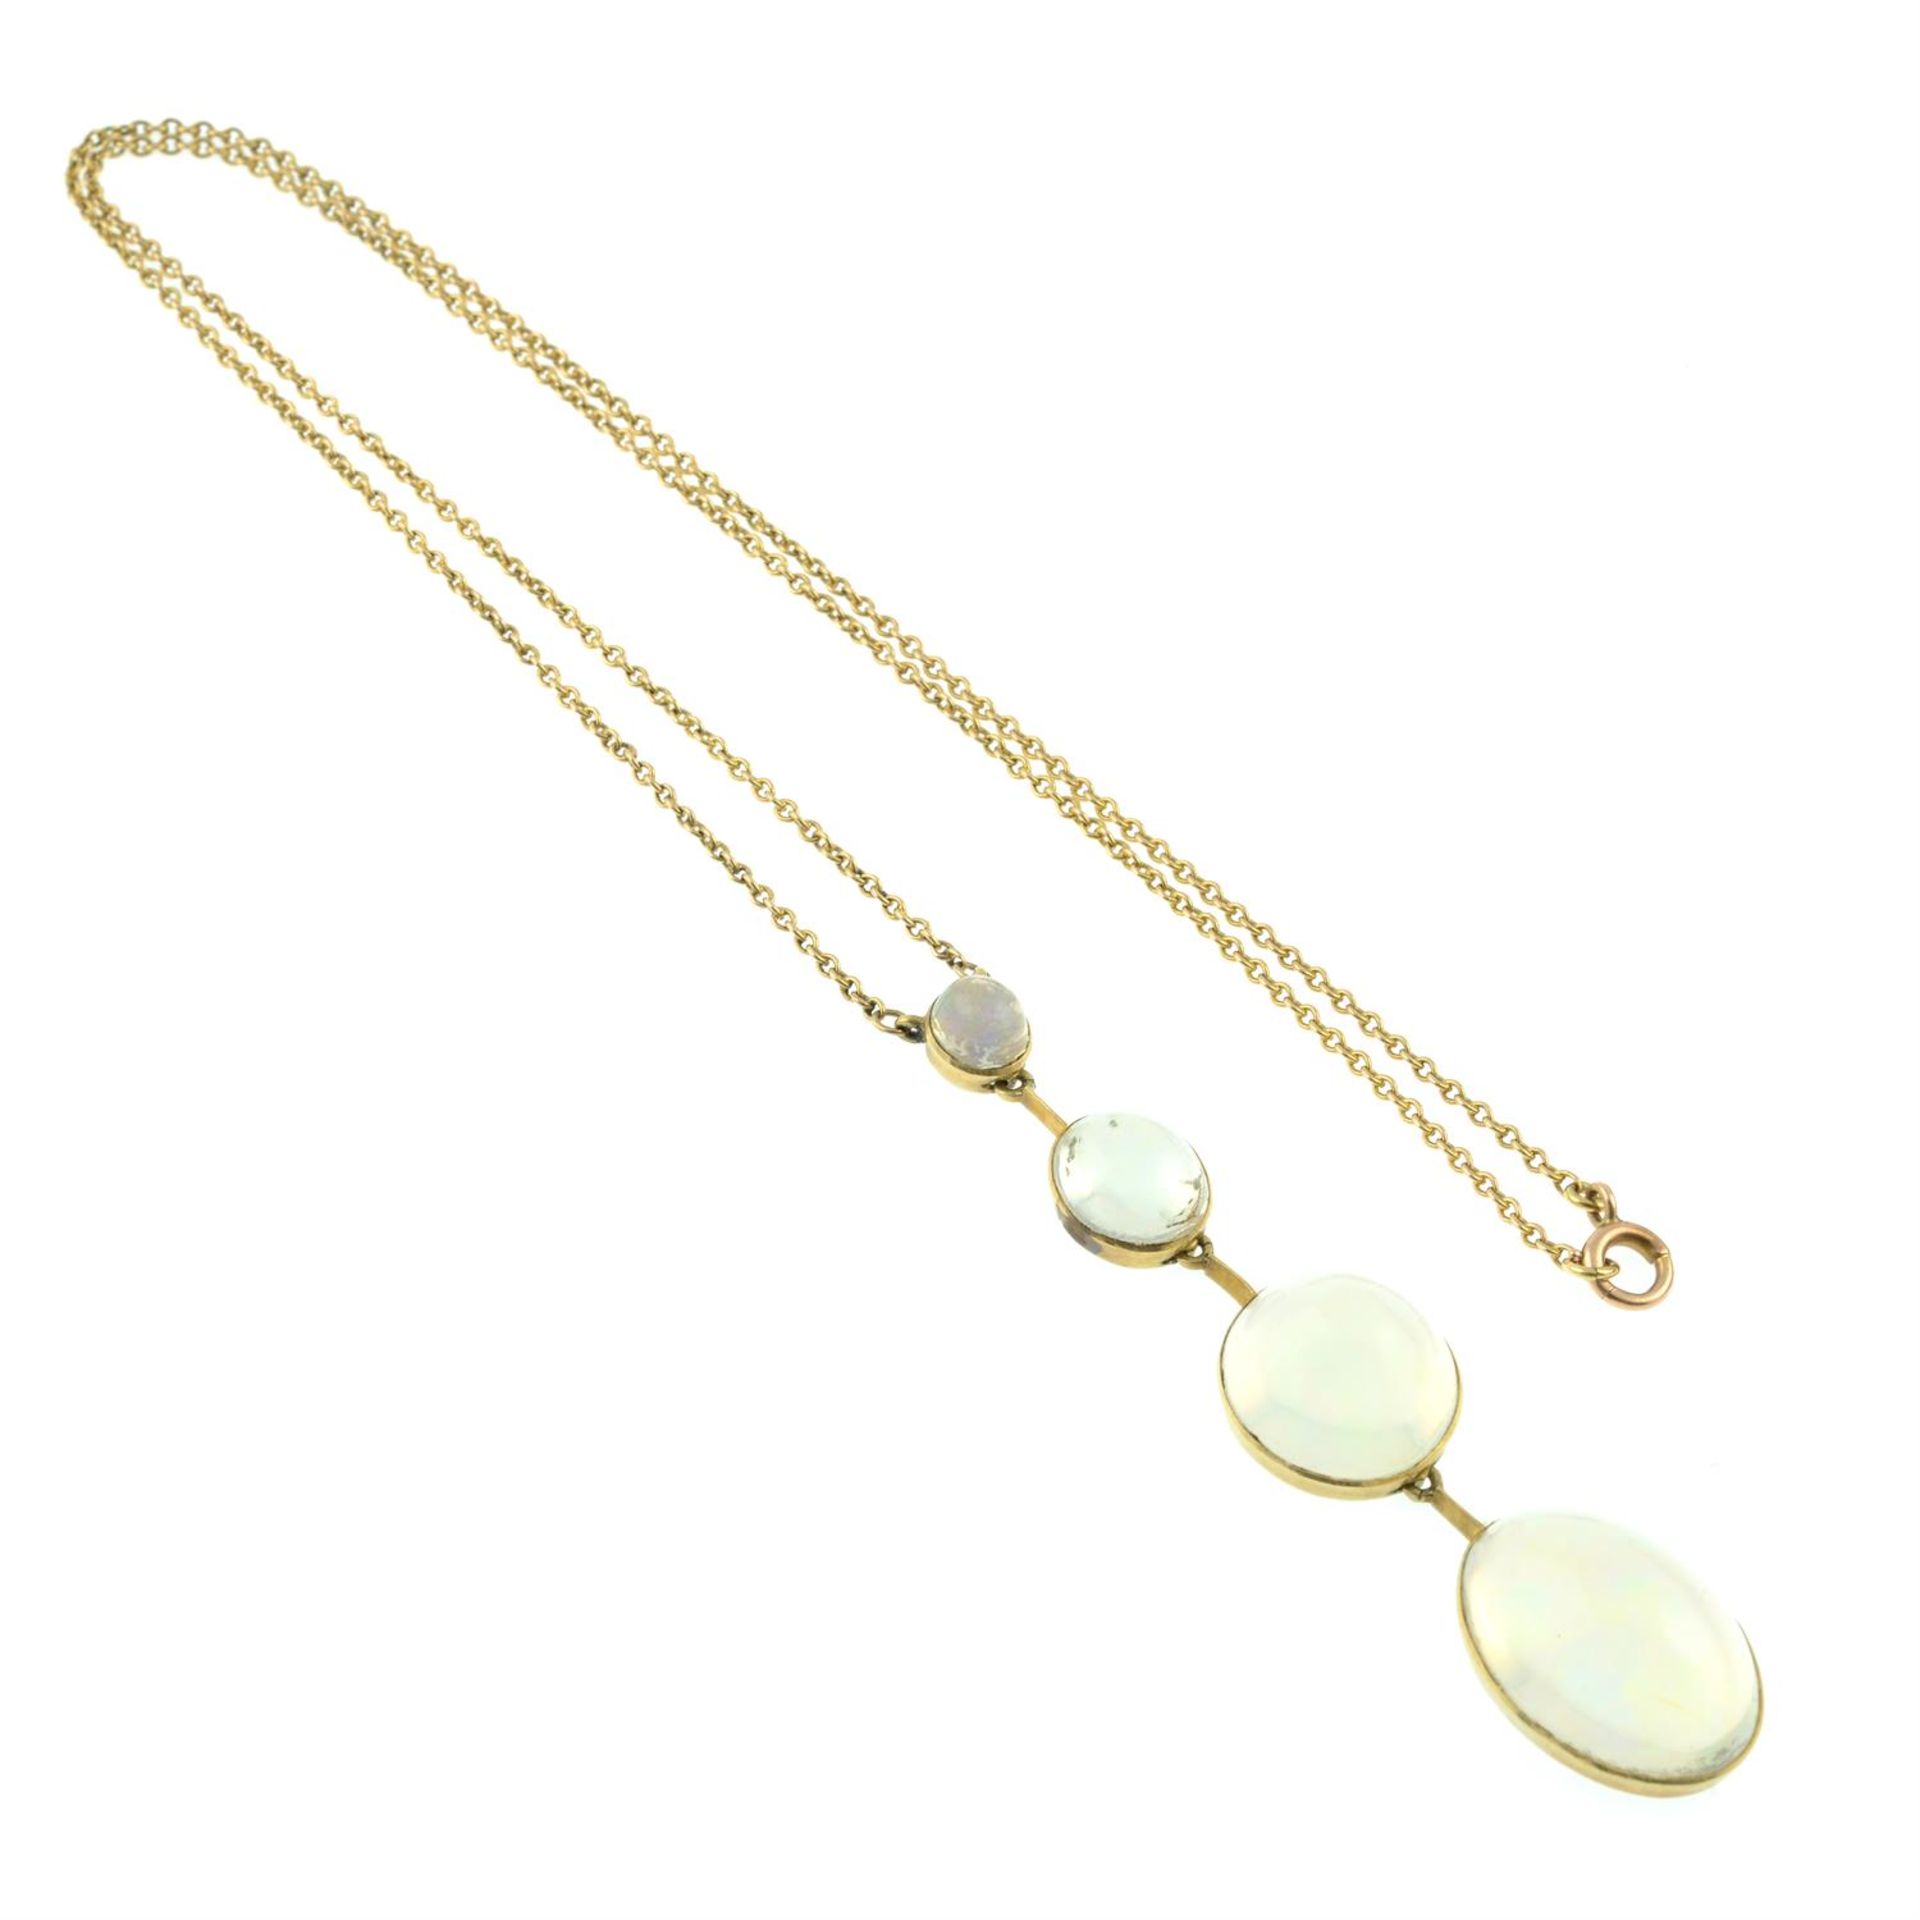 An Edwardian 15ct gold opal drop pendant, with integral chain and later clasp. - Image 4 of 5